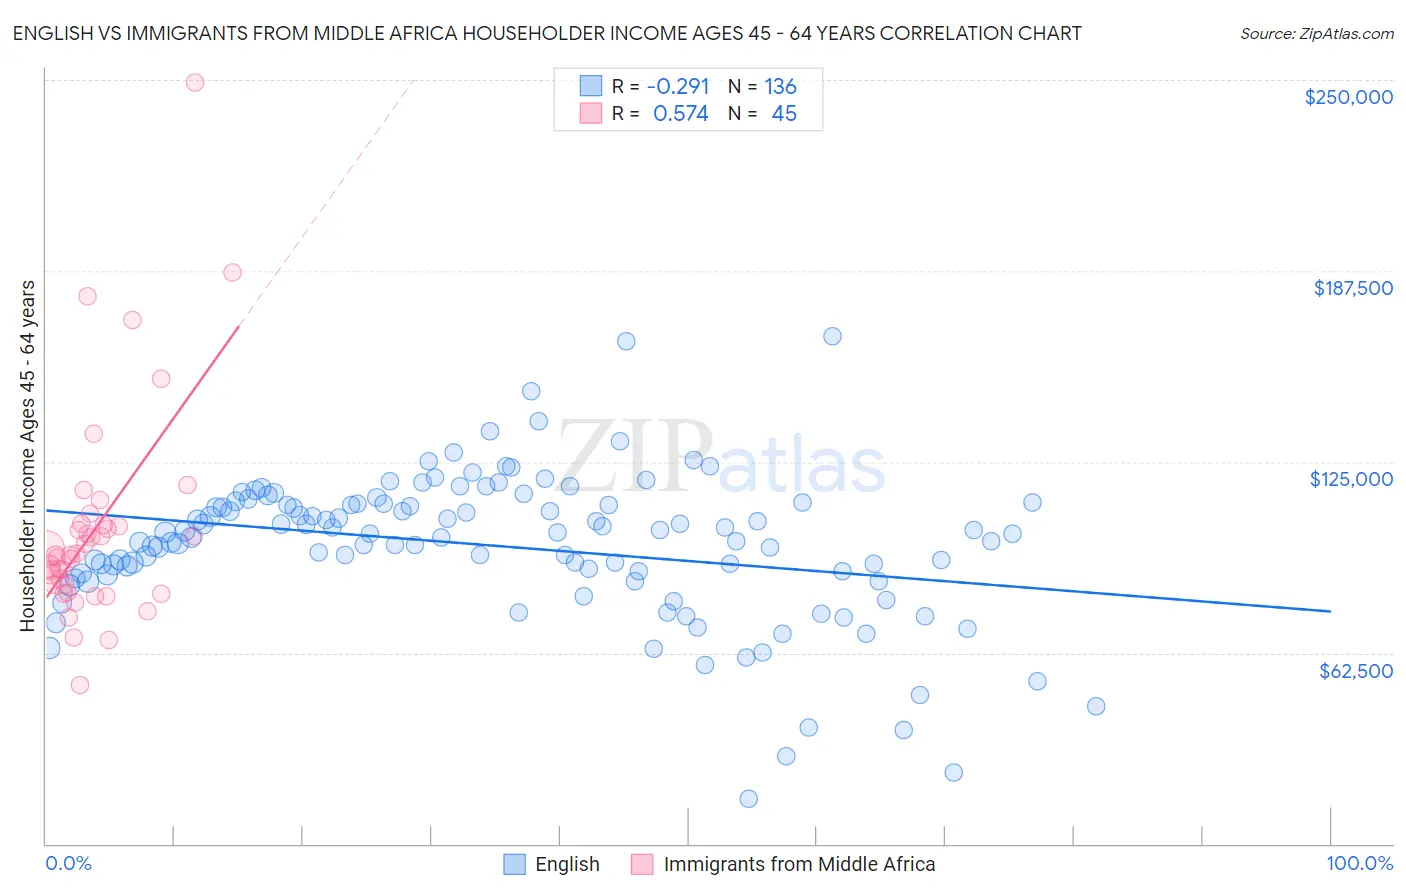 English vs Immigrants from Middle Africa Householder Income Ages 45 - 64 years